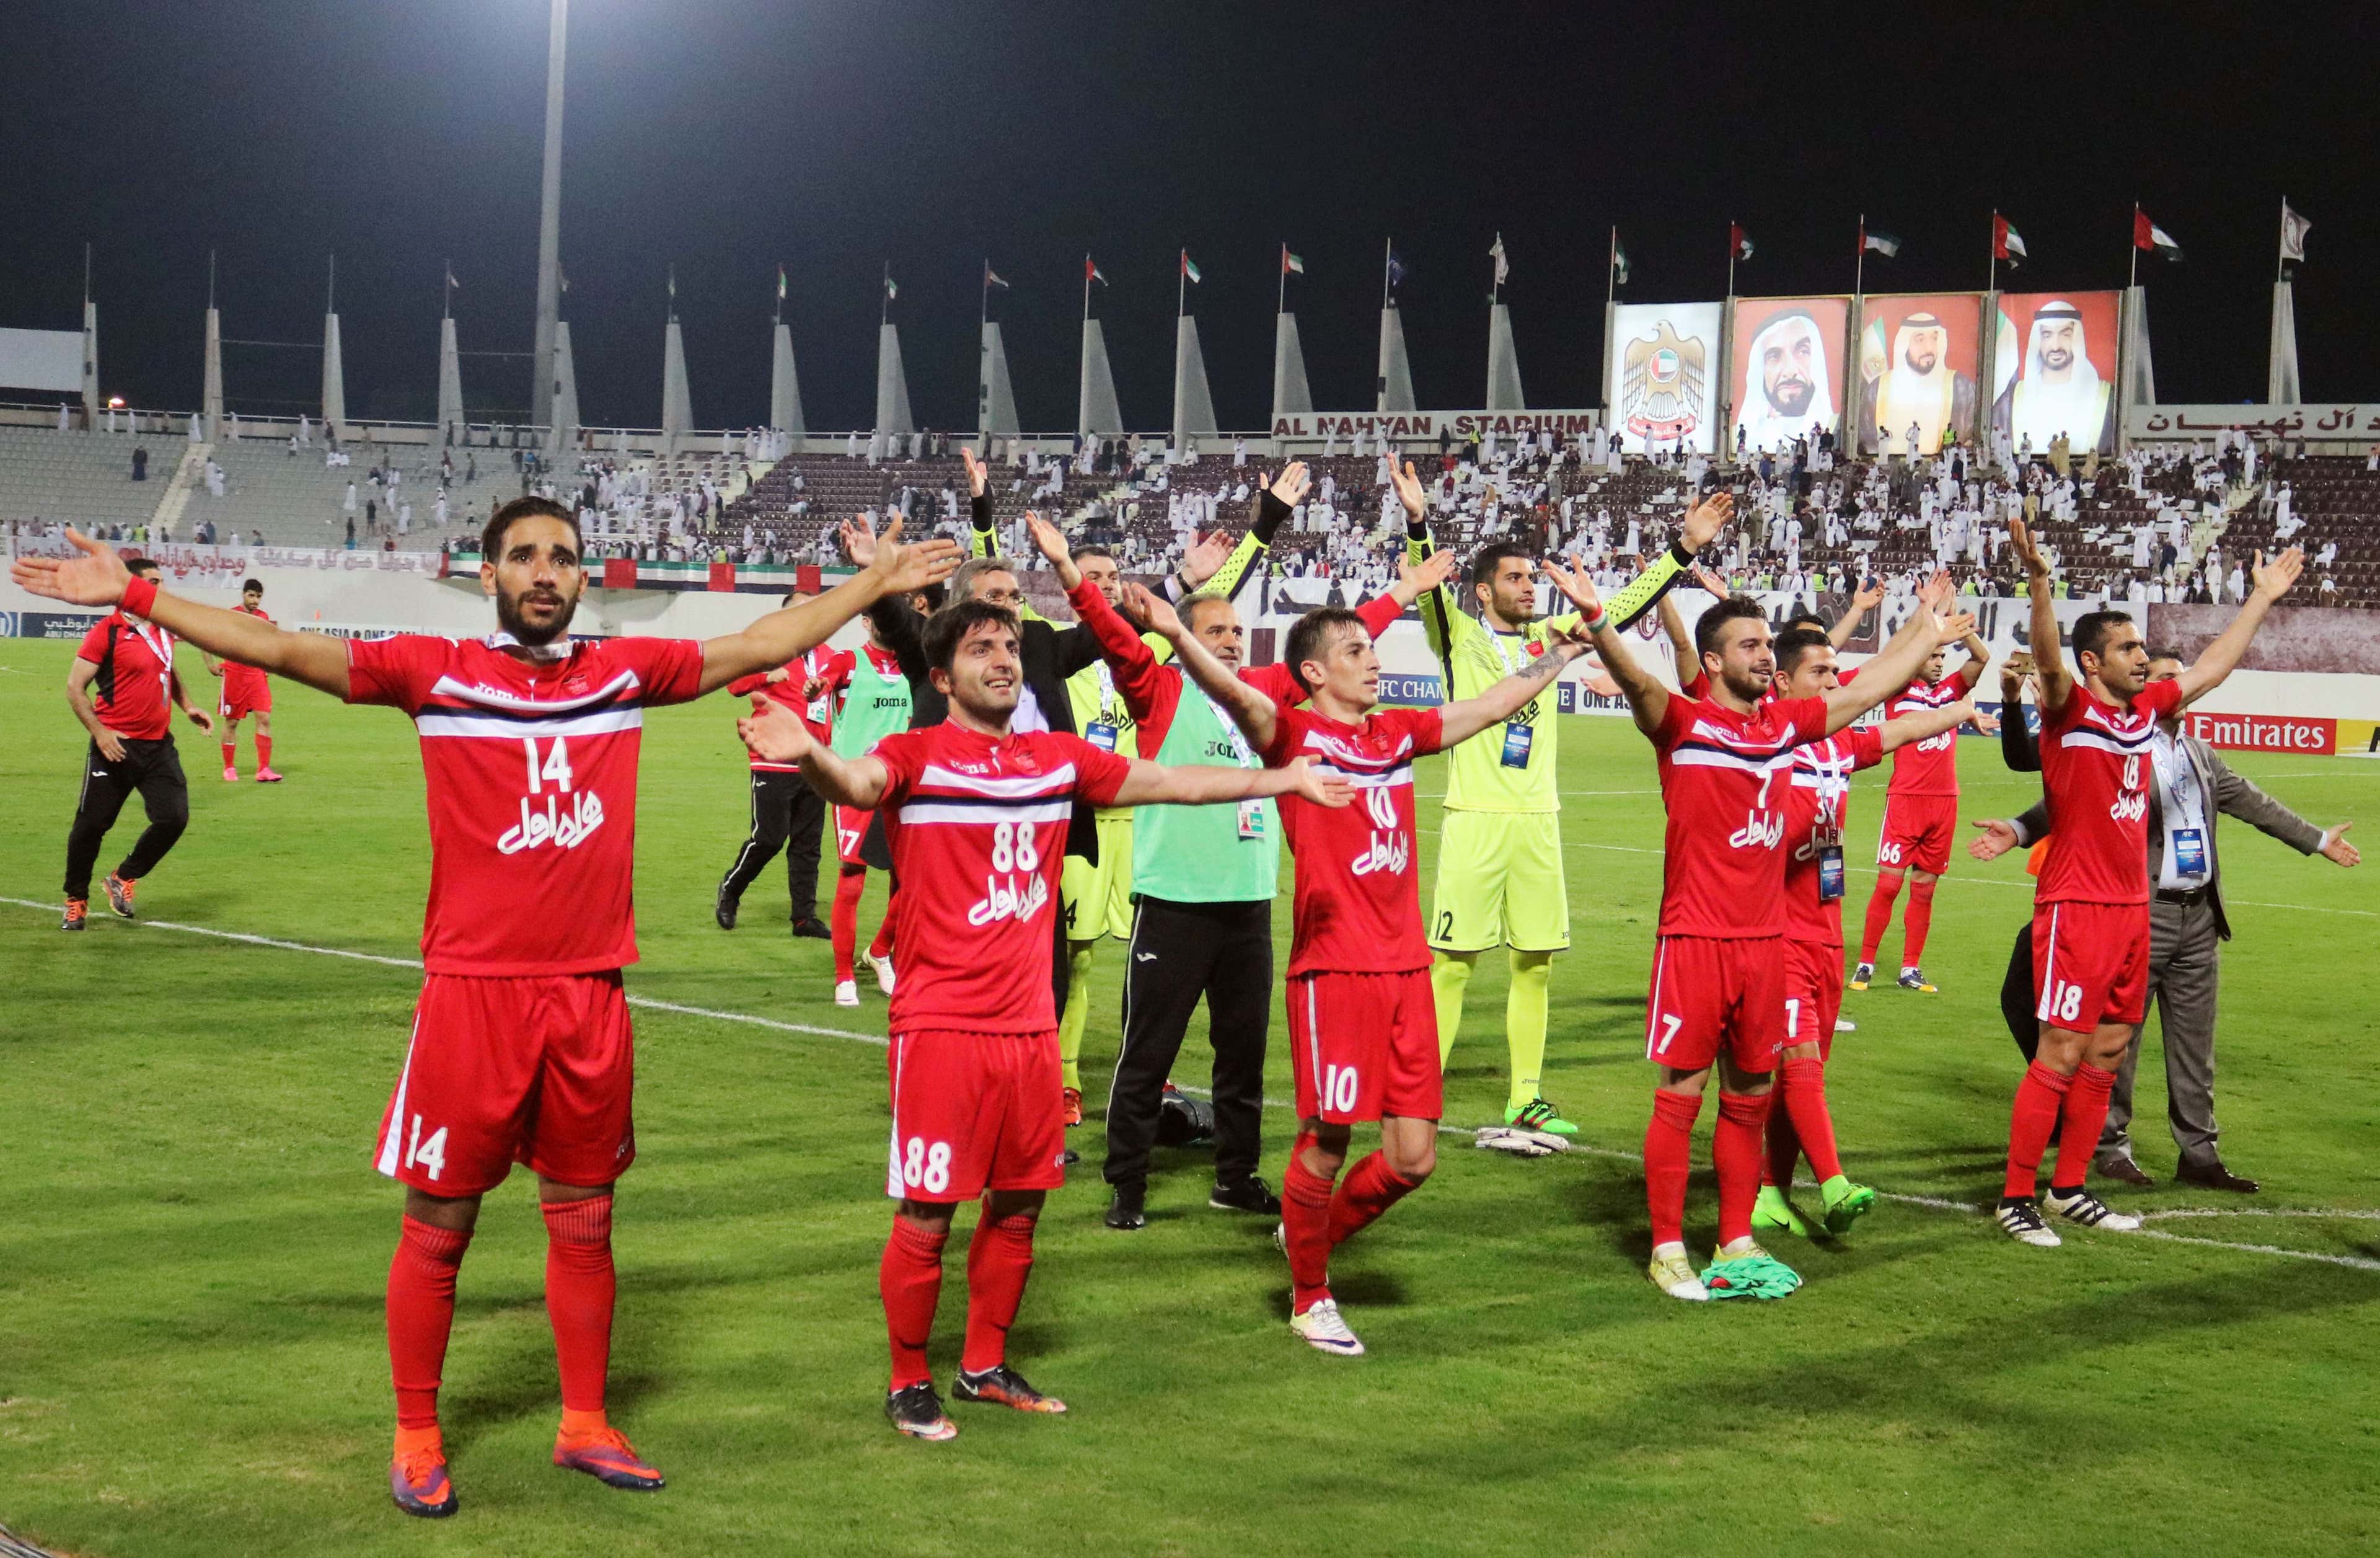 Persepolis's players celebrate after winning the AFC Champions League qualifying football match between UAE's Al-Wahda and Iran's Persepolis on February 28, 2017